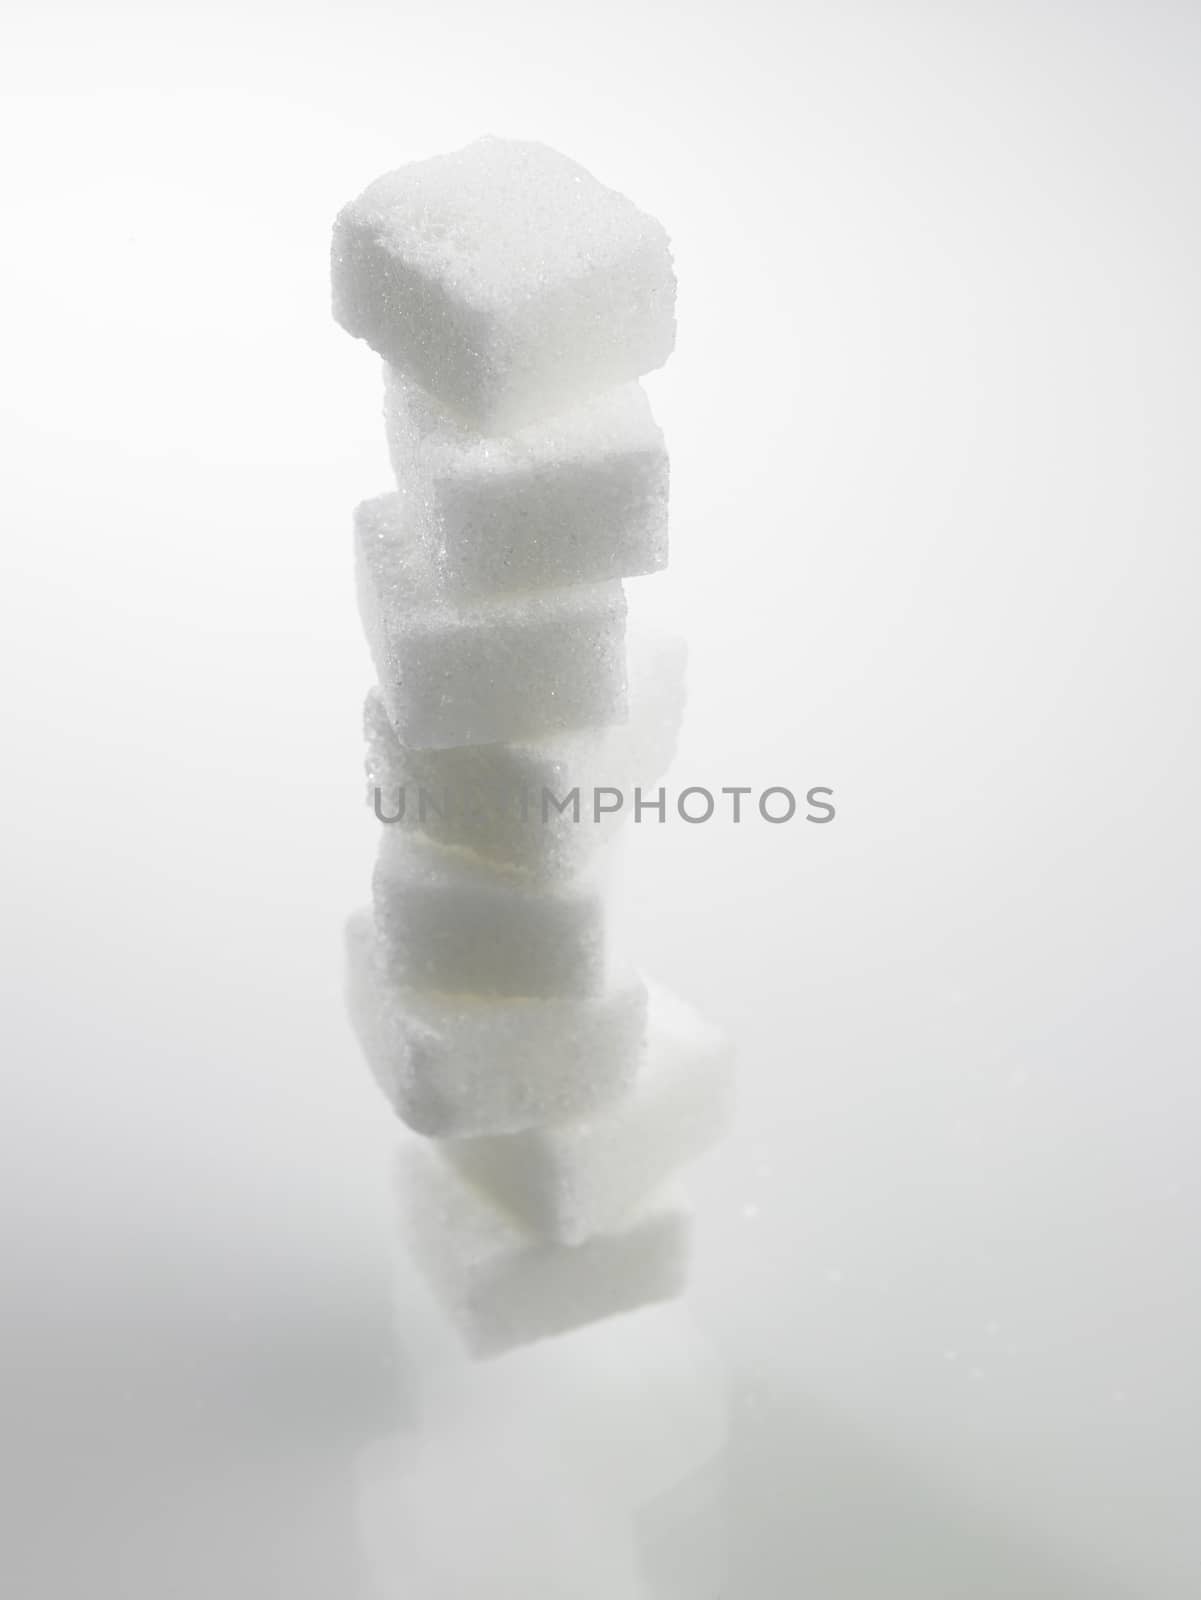 stack of the cube sugar 